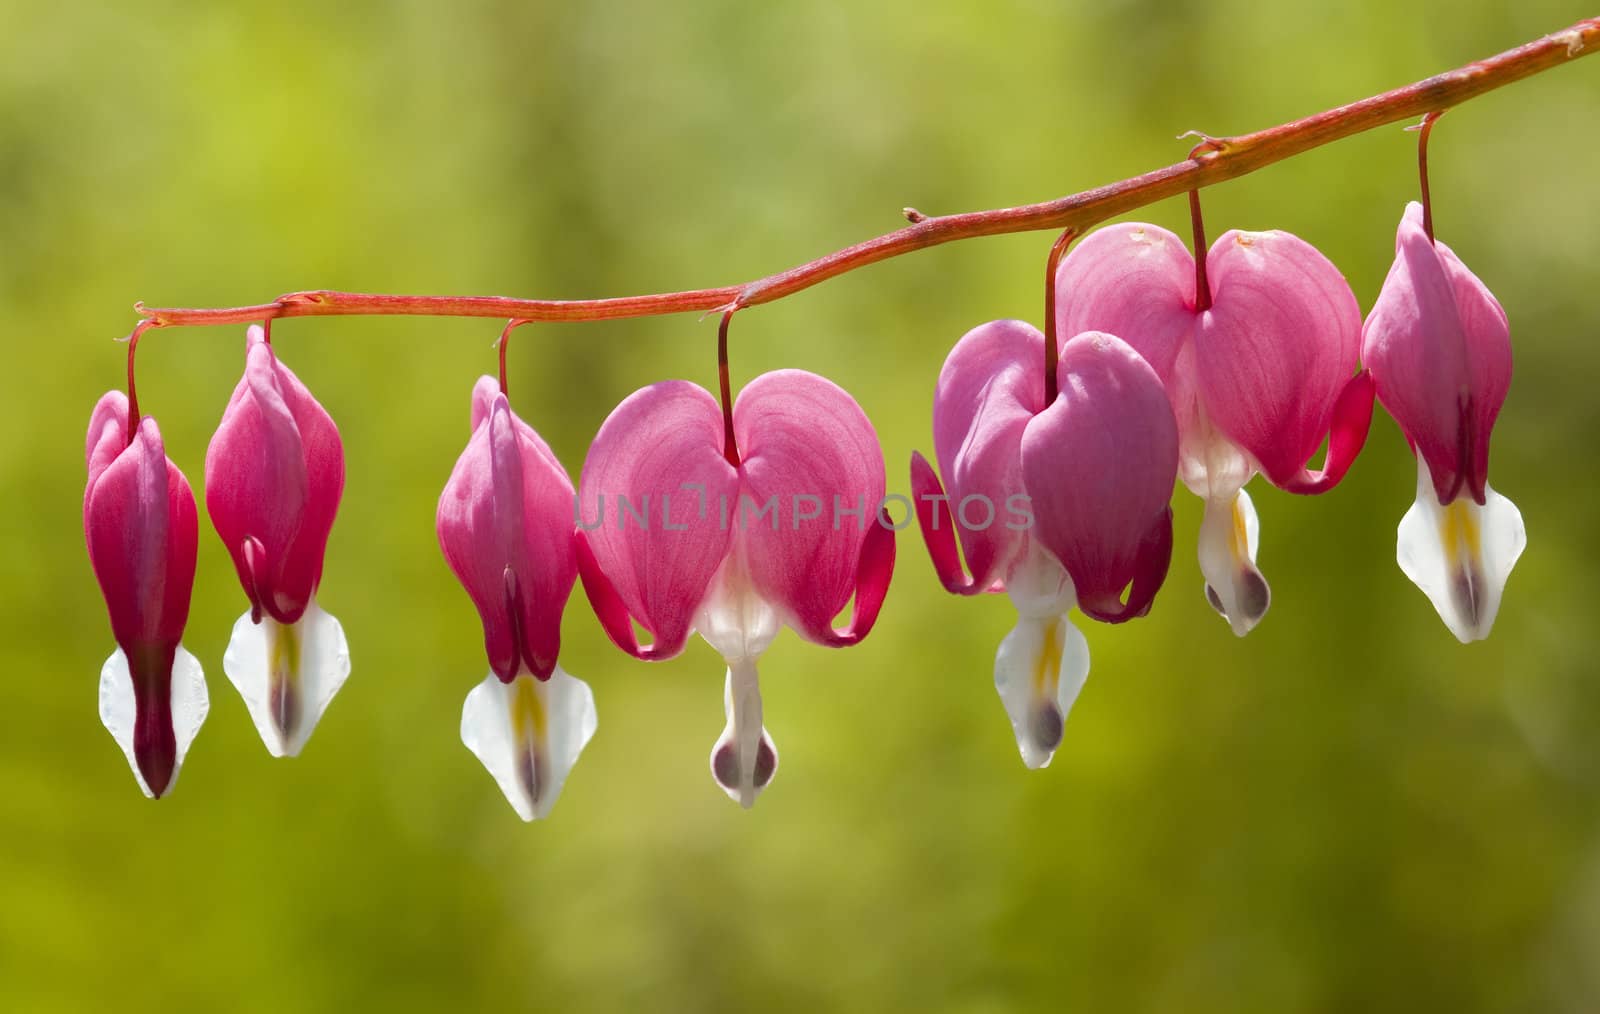 Flowers of the bleeding heart plant, Dicentra spectabilis